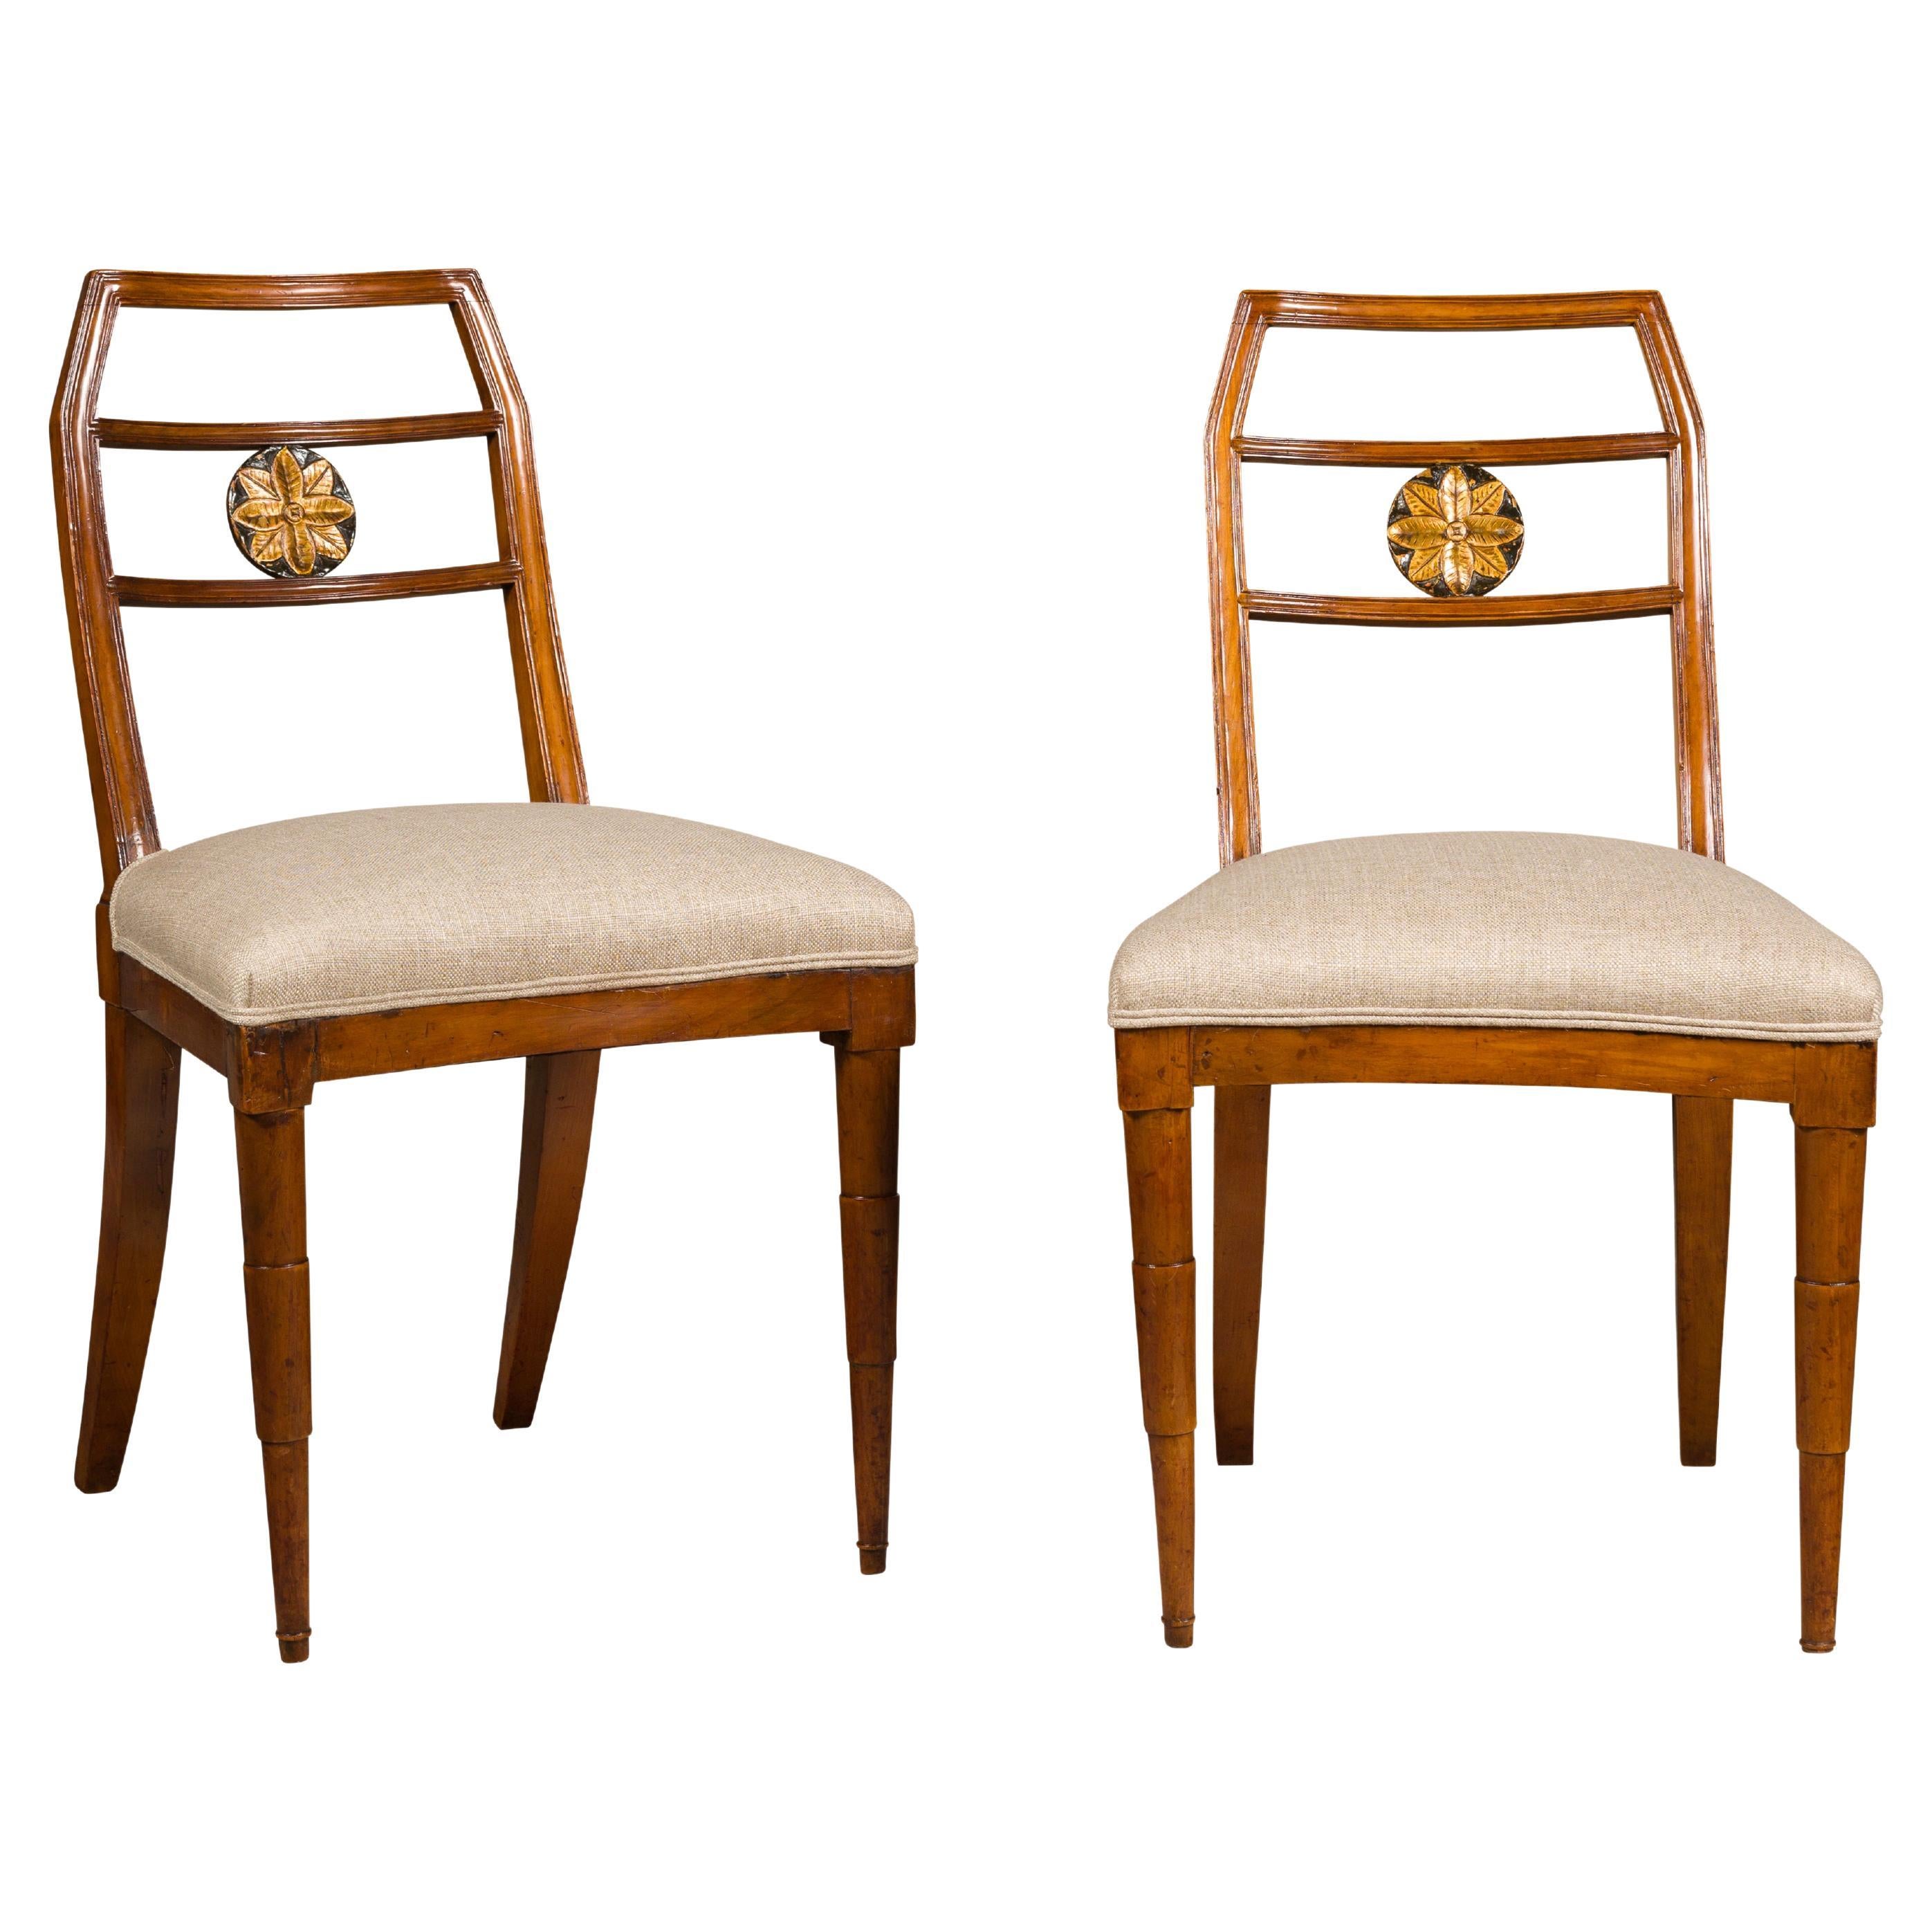 Italian 1800s Walnut Side Chairs with Carved and Gilt Floral Medallions, a Pair